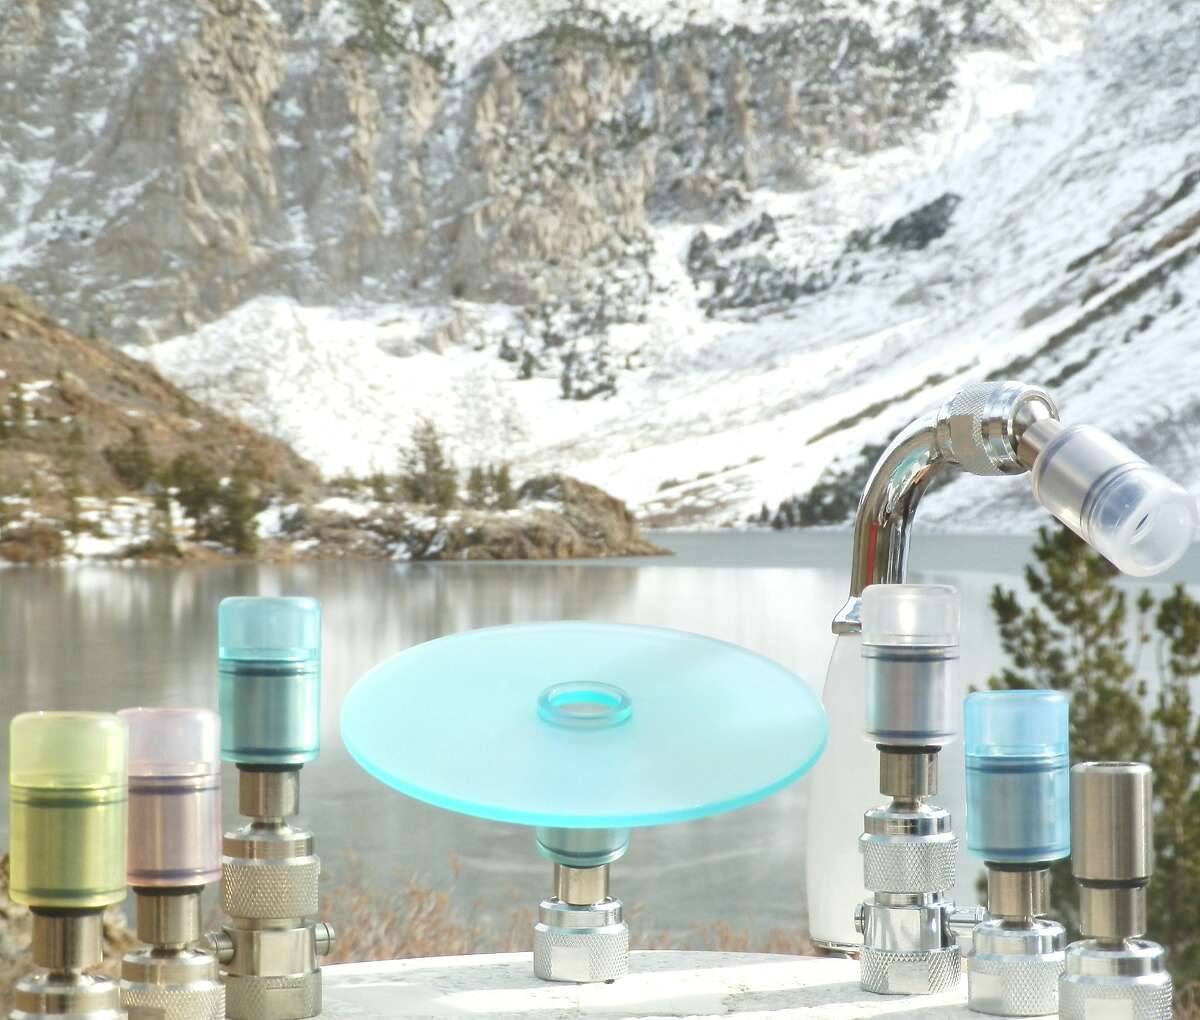 The line of High Sierra Showerheads, which is owned by David Malcolm and operates out Coarsegold, CA.